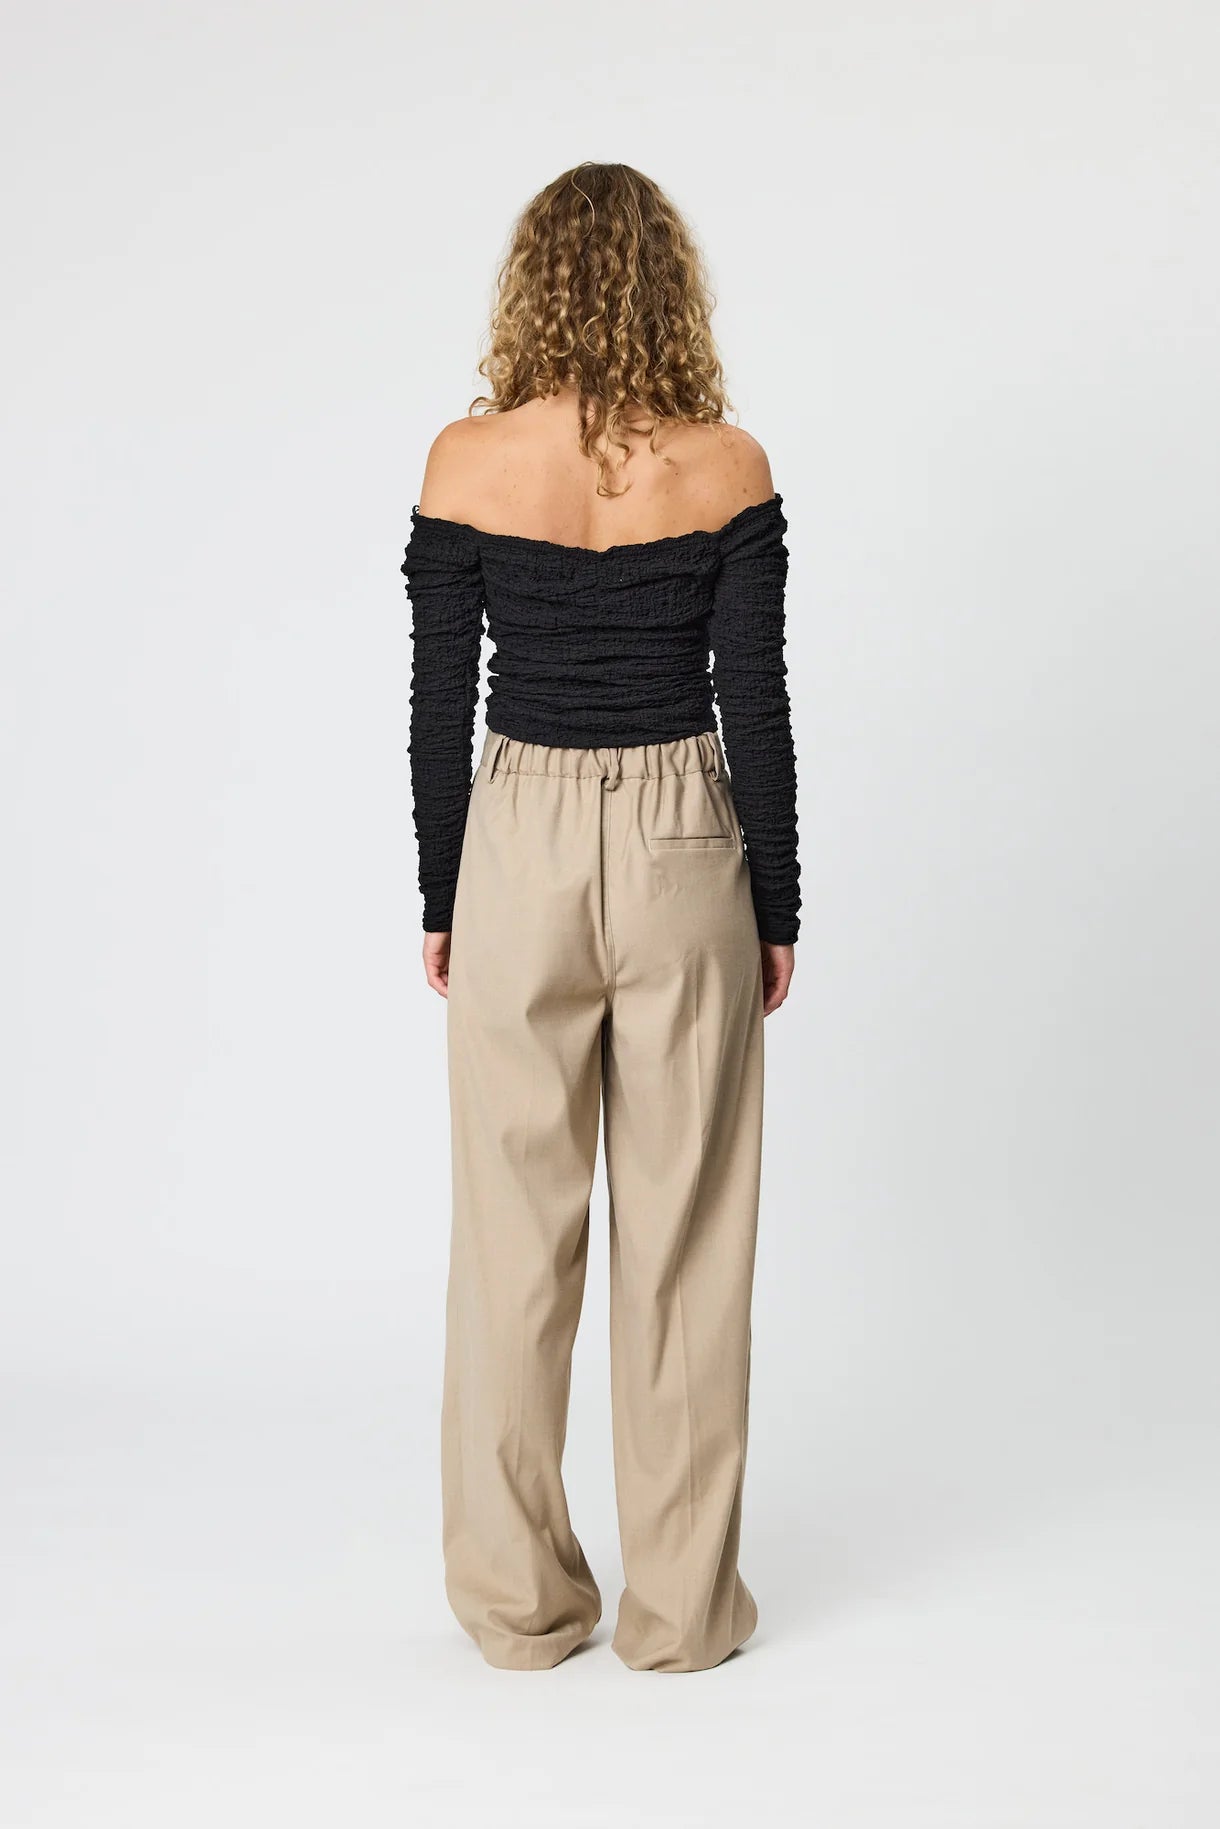 Evie Tailored Pants - Oat